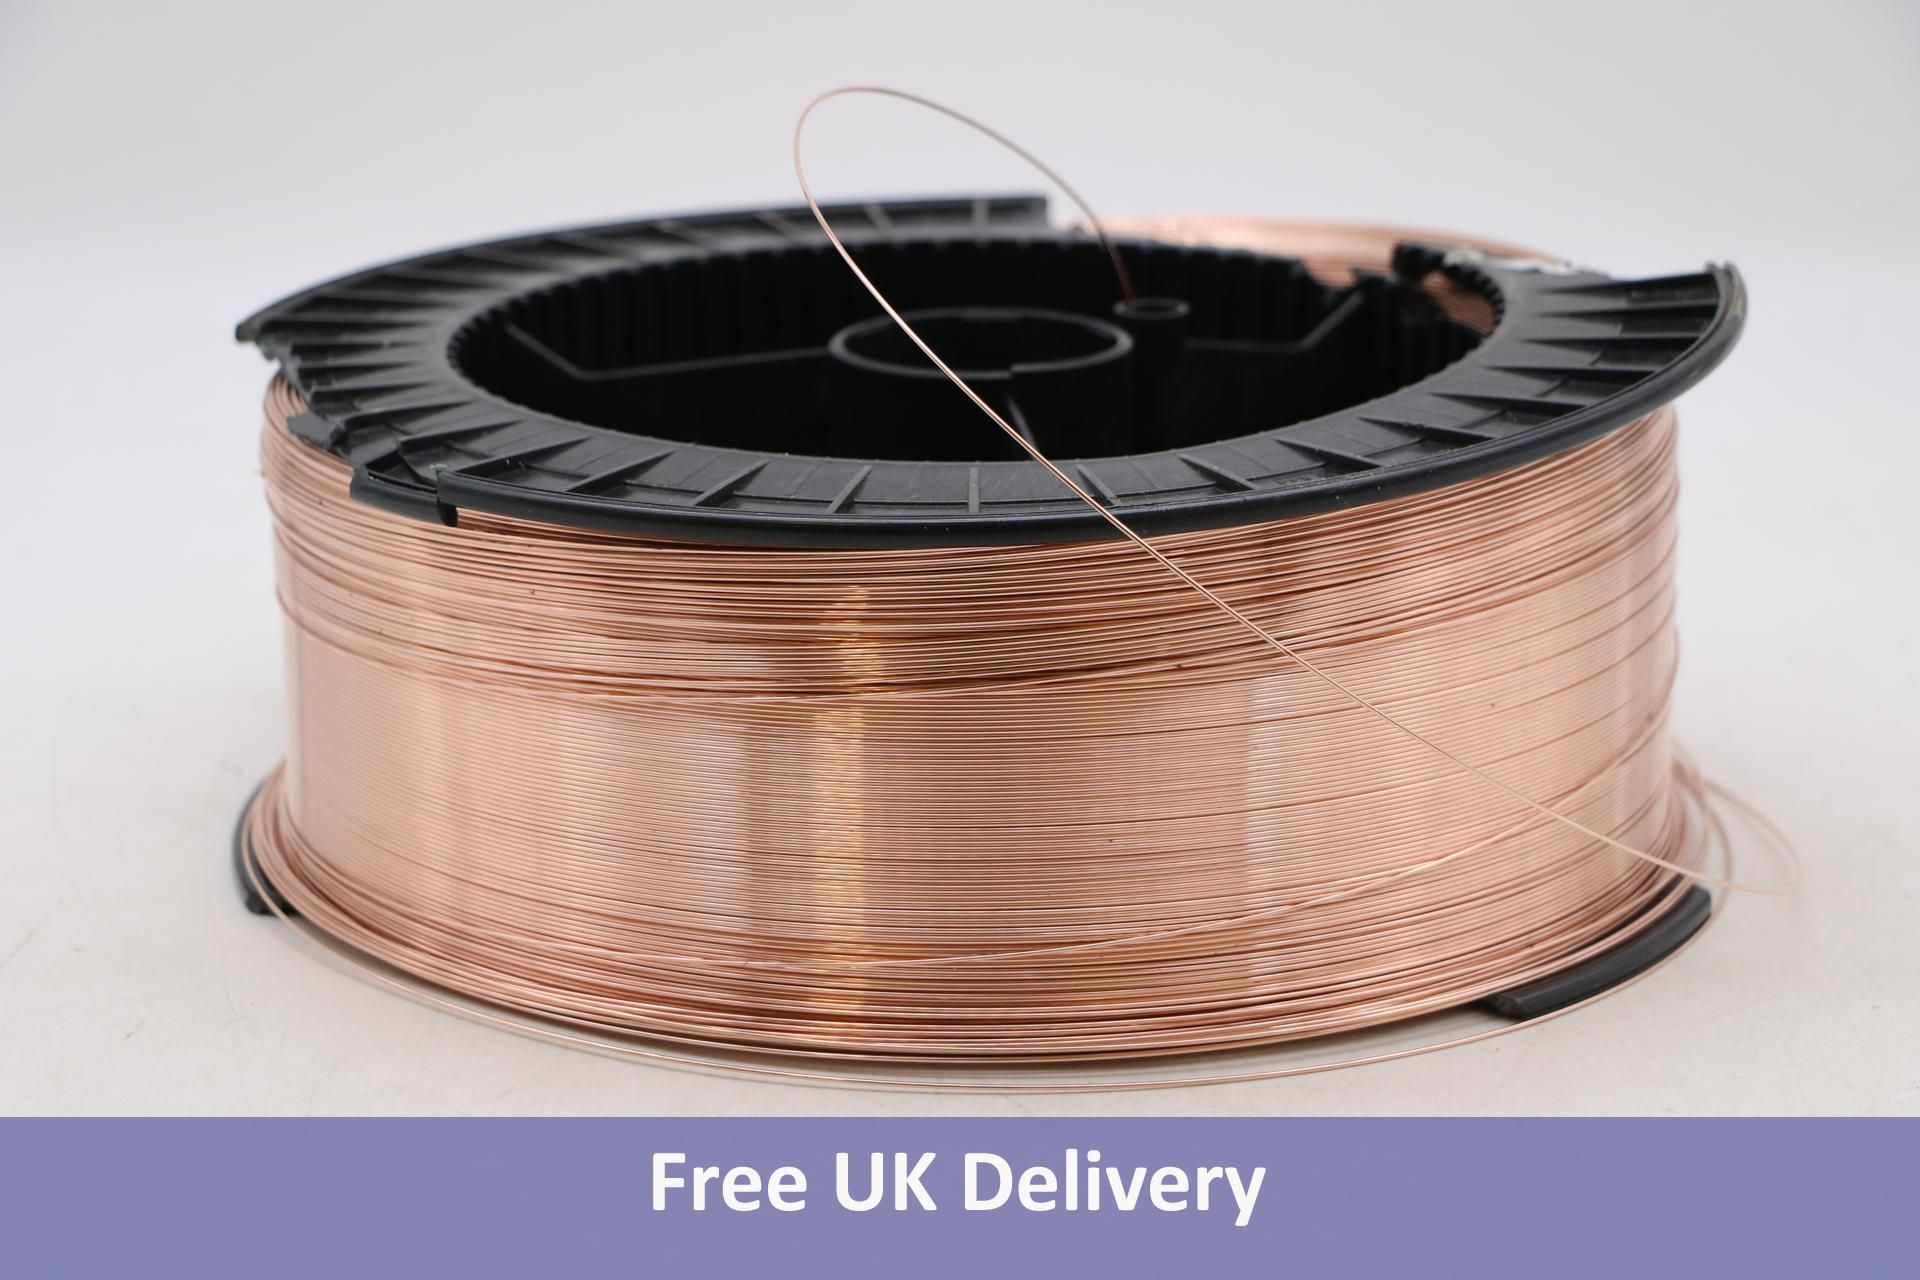 Reel of Copper Wire, Approximately 1.8kg, Plastic Reel Damaged